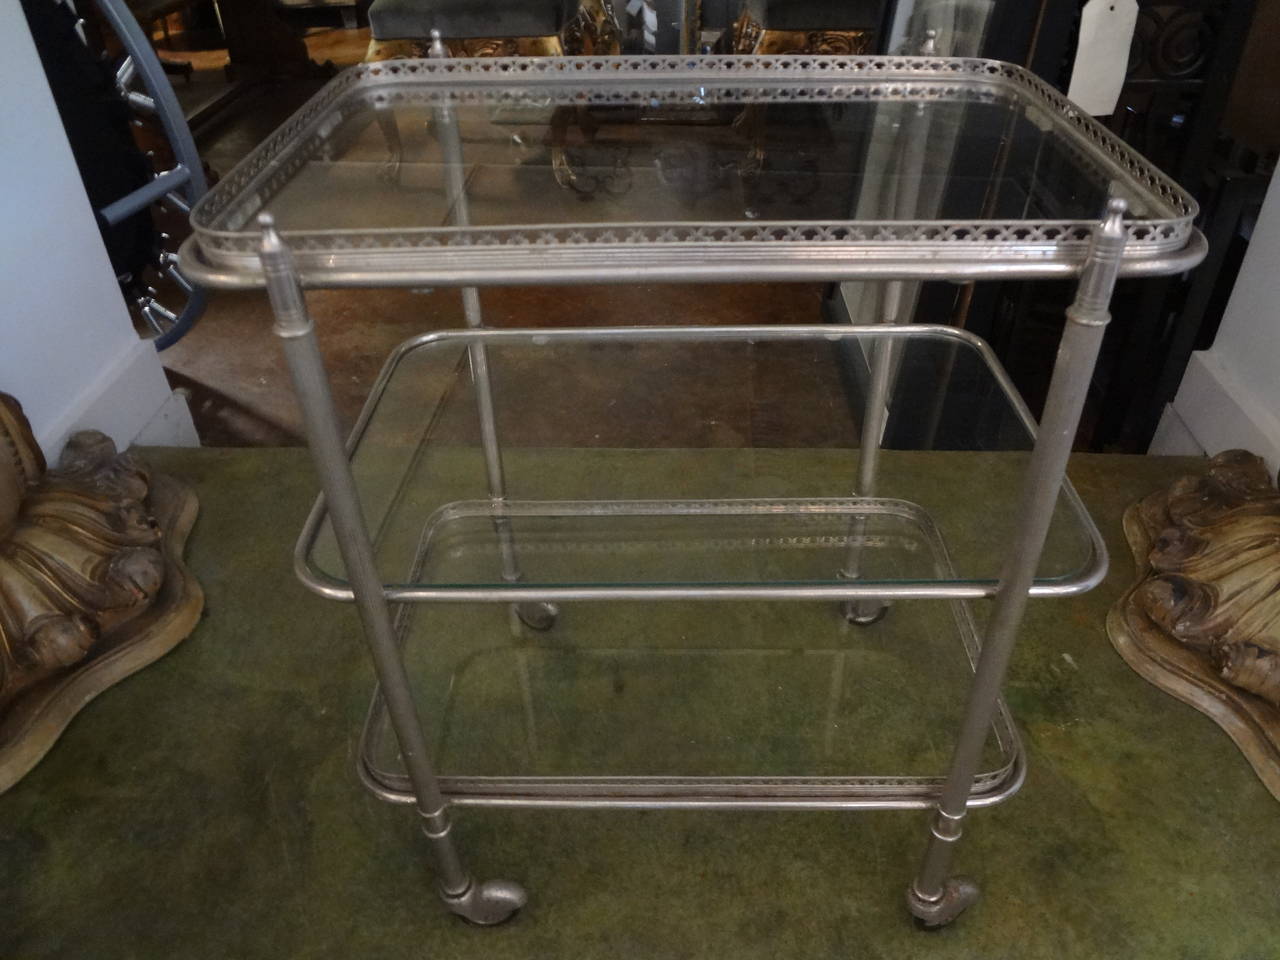 Versatile French Mid-Century Modern nickel-plated drinks or bar cart on casters.

Please click KIRBY ANTIQUES logo below to view additional pieces from our vast inventory.

           